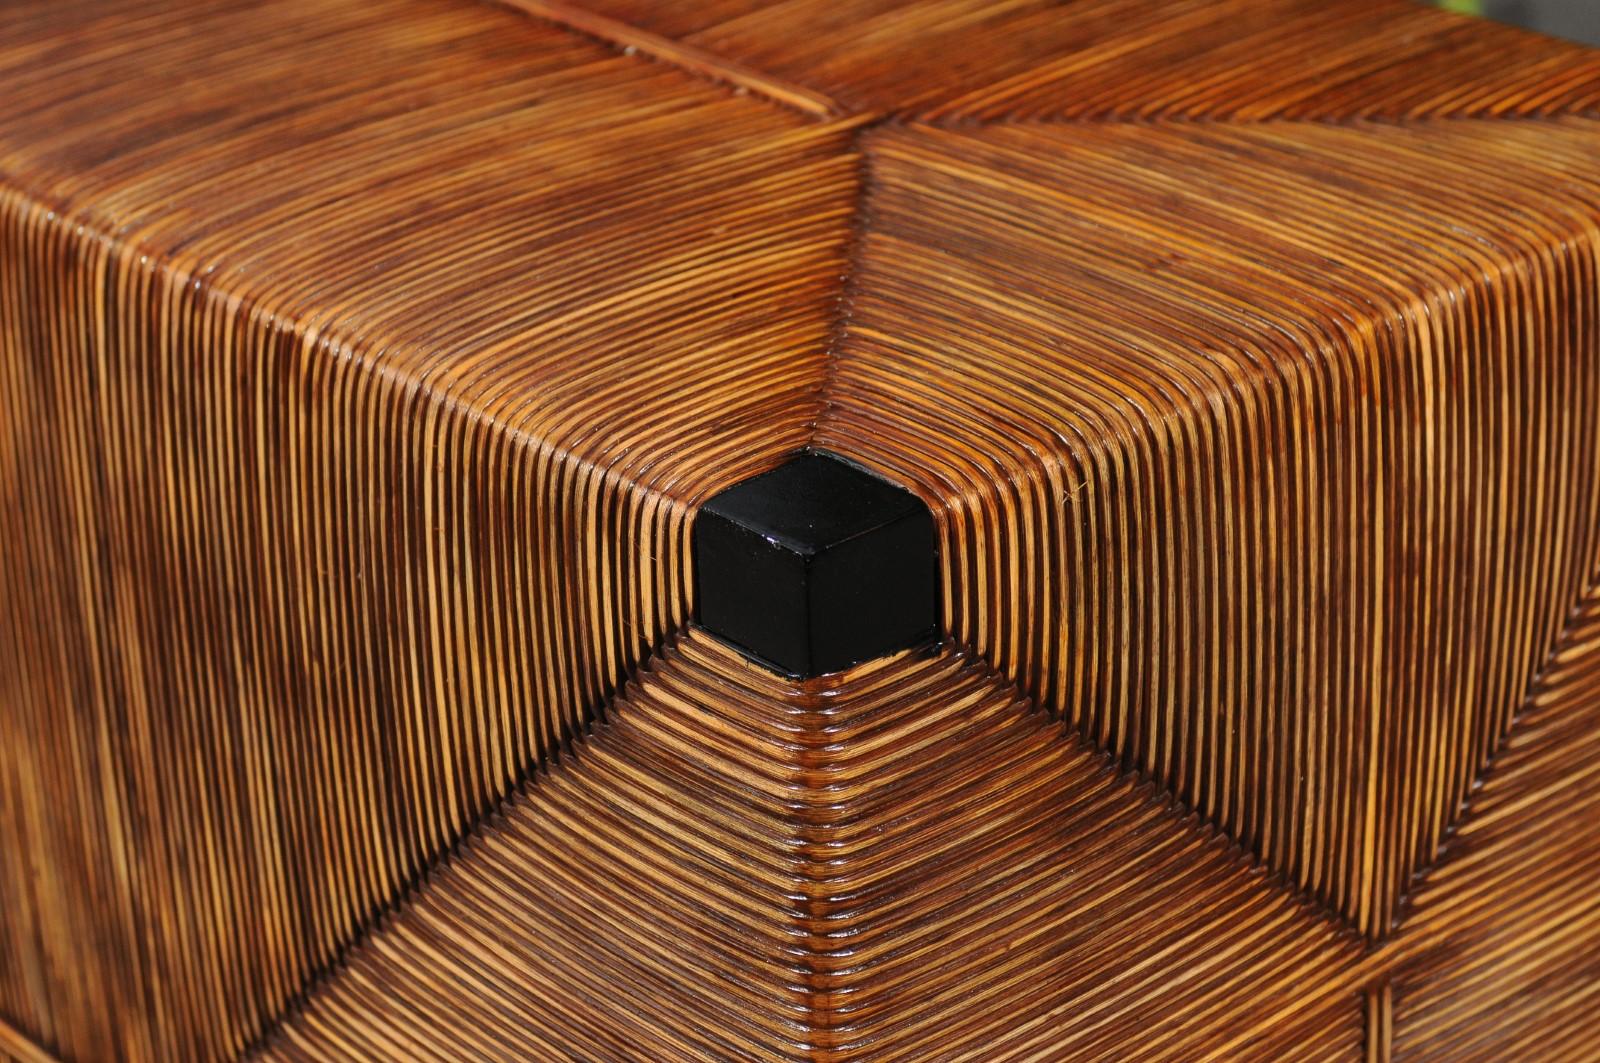 Sublime Black Lacquer Wicker Commode by John Hutton for Donghia- Pair Available 7